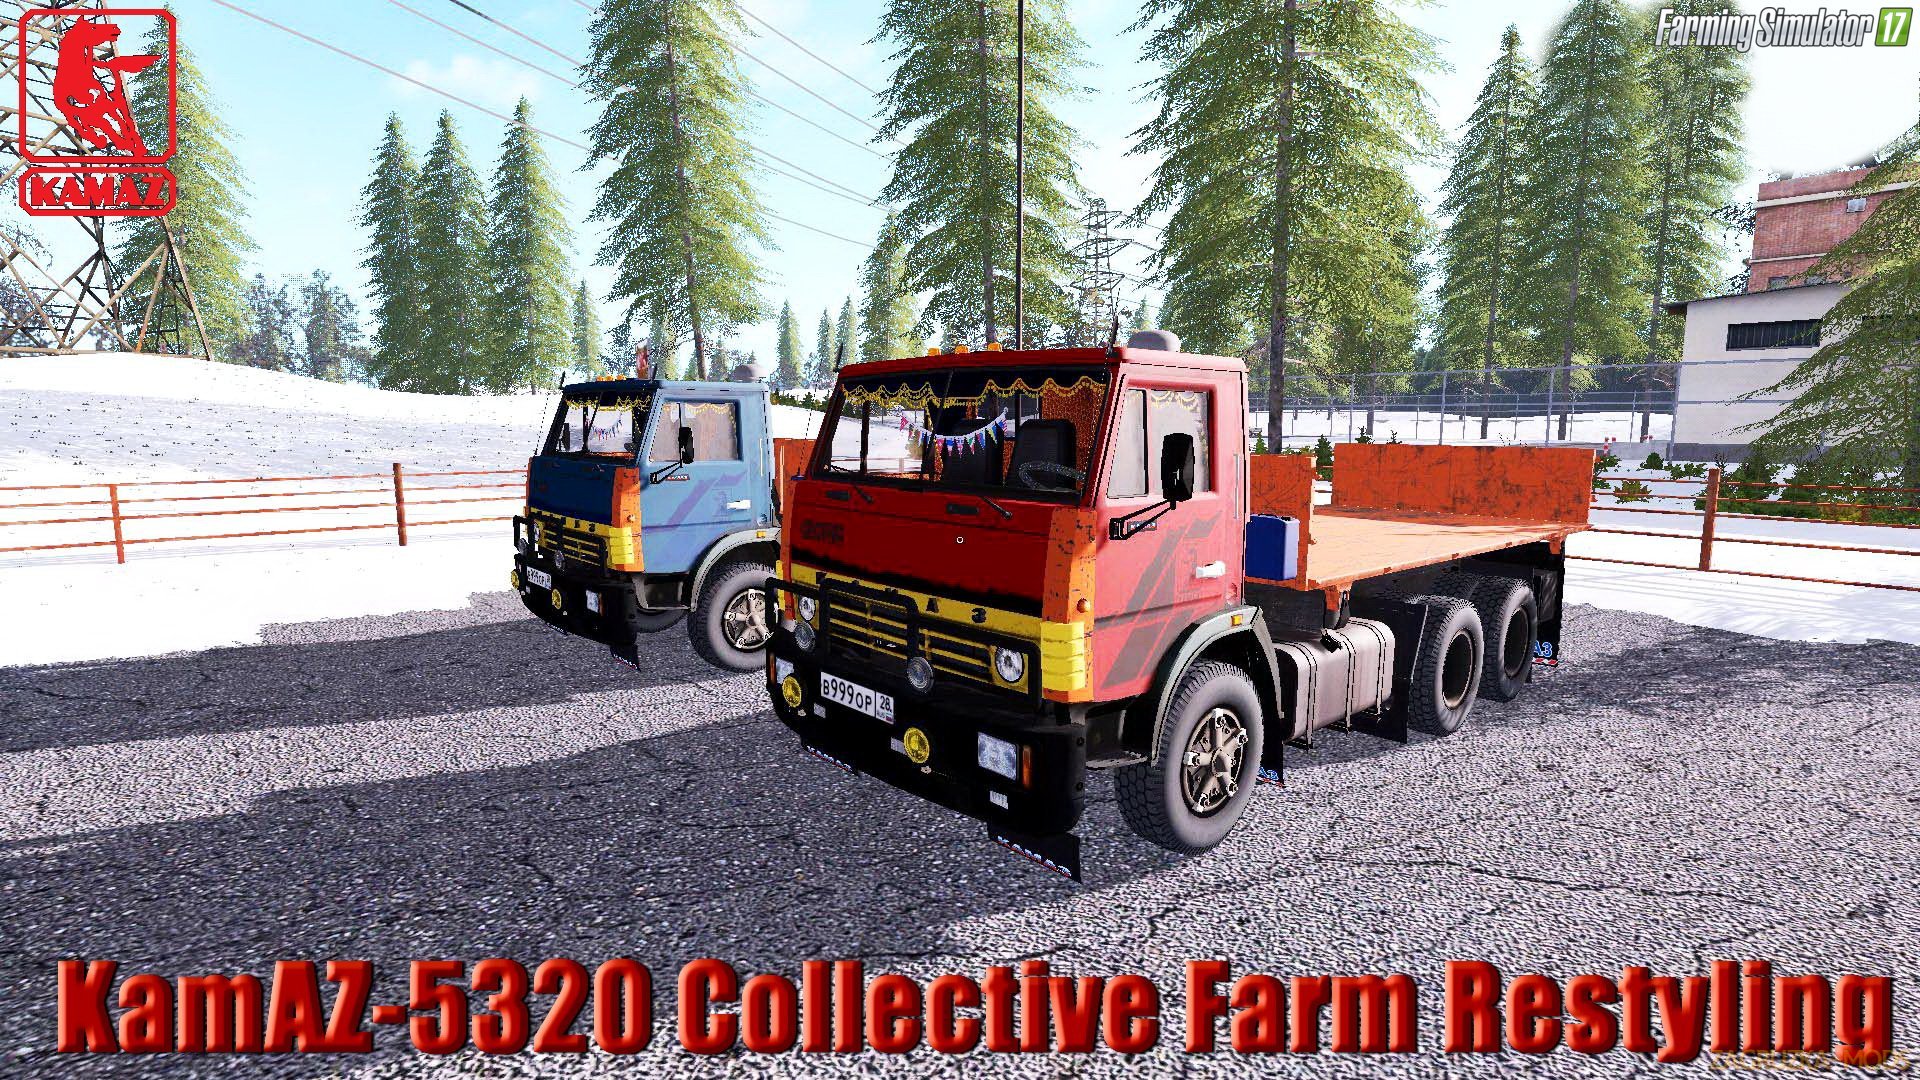 KamAZ-5320 Collective Farm Restyling v1.2.1 for FS 17